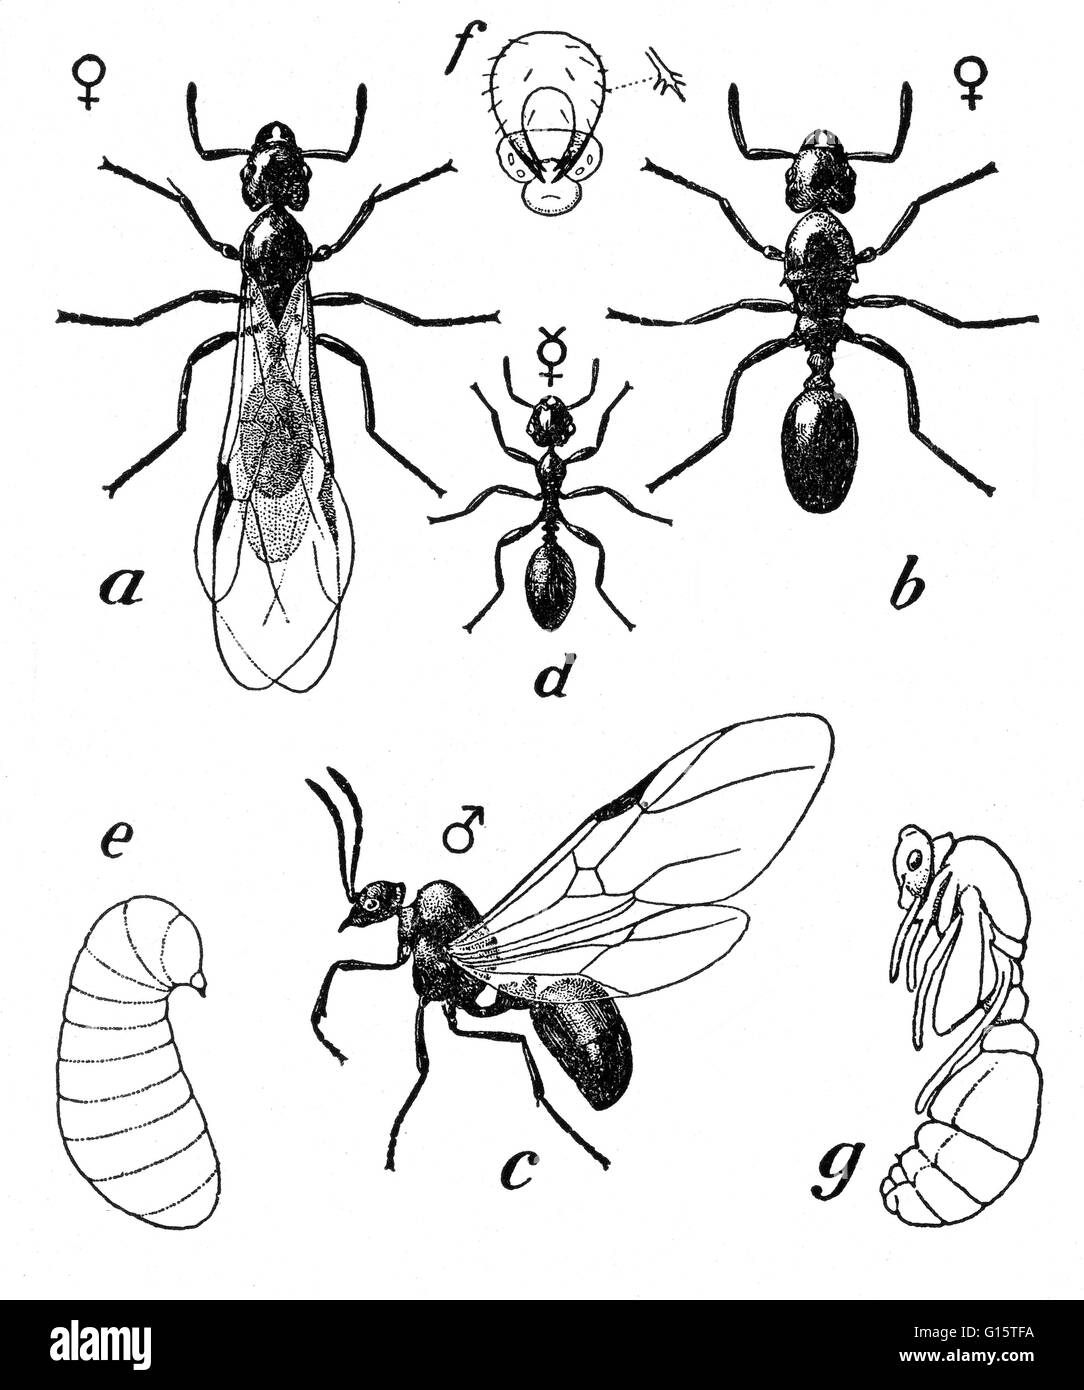 Diagram of the pavement ant. (a = female; b = female after loss of wings; c = male, d = worker, e = larva; g = pupa; f = head of larva. The pavement ant, Tetramorium caespitum, is a common household pest. Its name comes from the fact that colonies usually Stock Photo